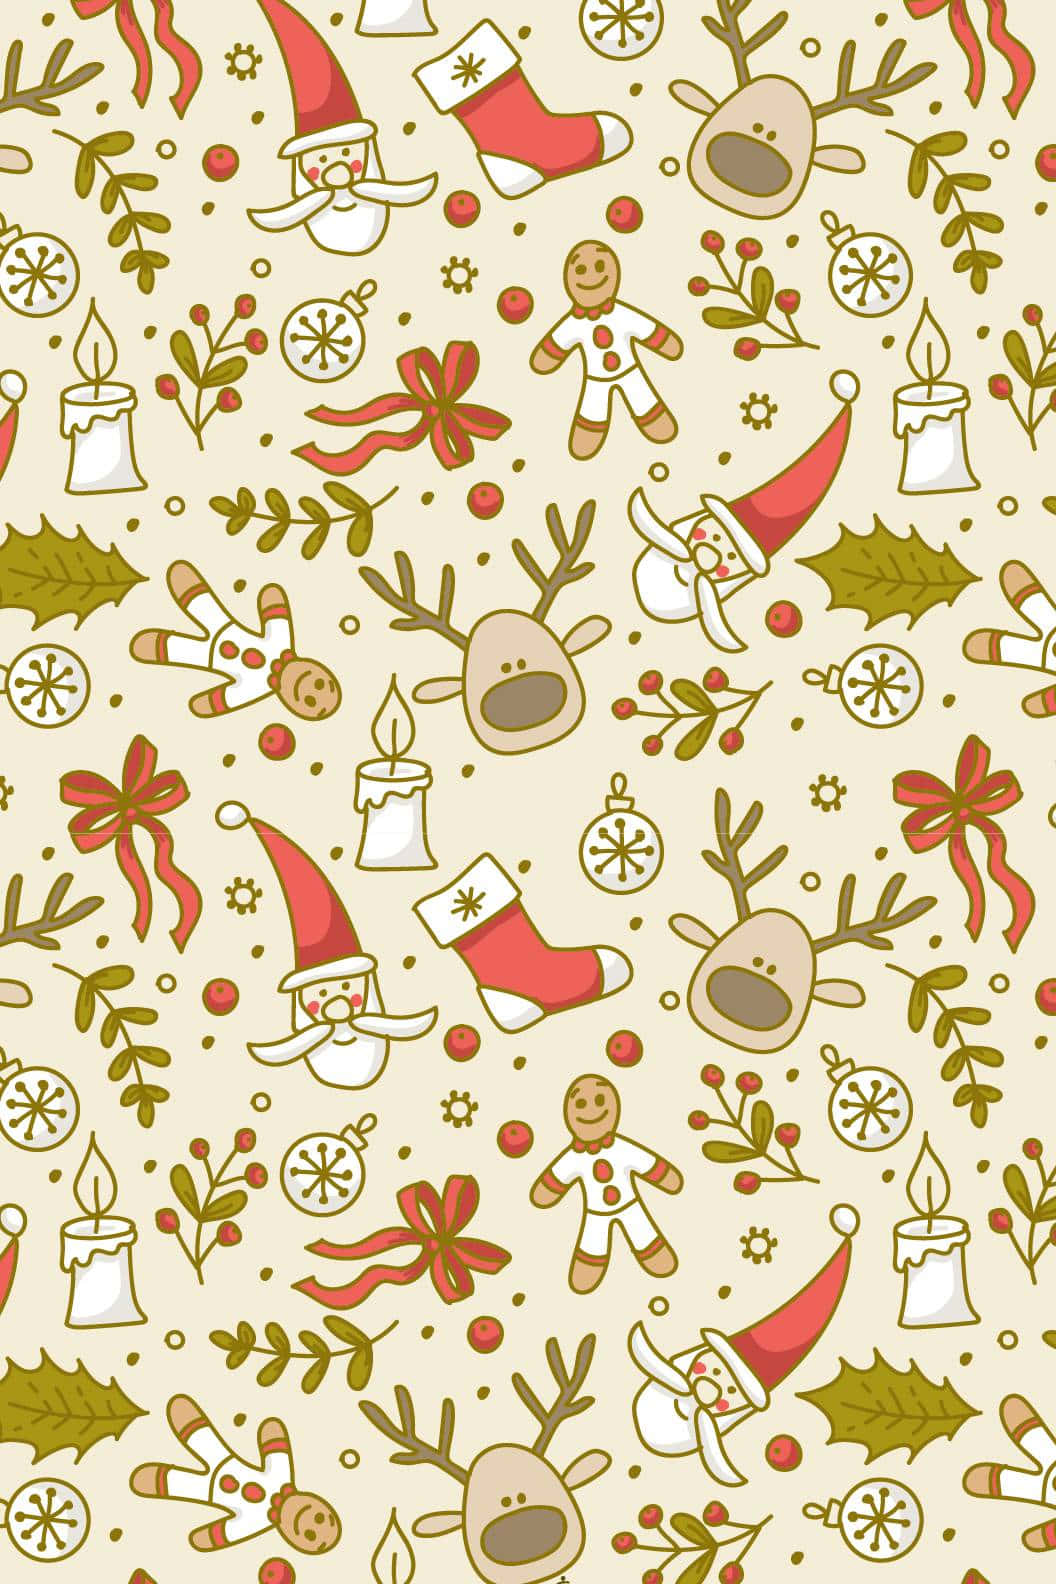 Ho Ho Ho! Spread the love this holiday season with this Cute Christmas Phone! Wallpaper